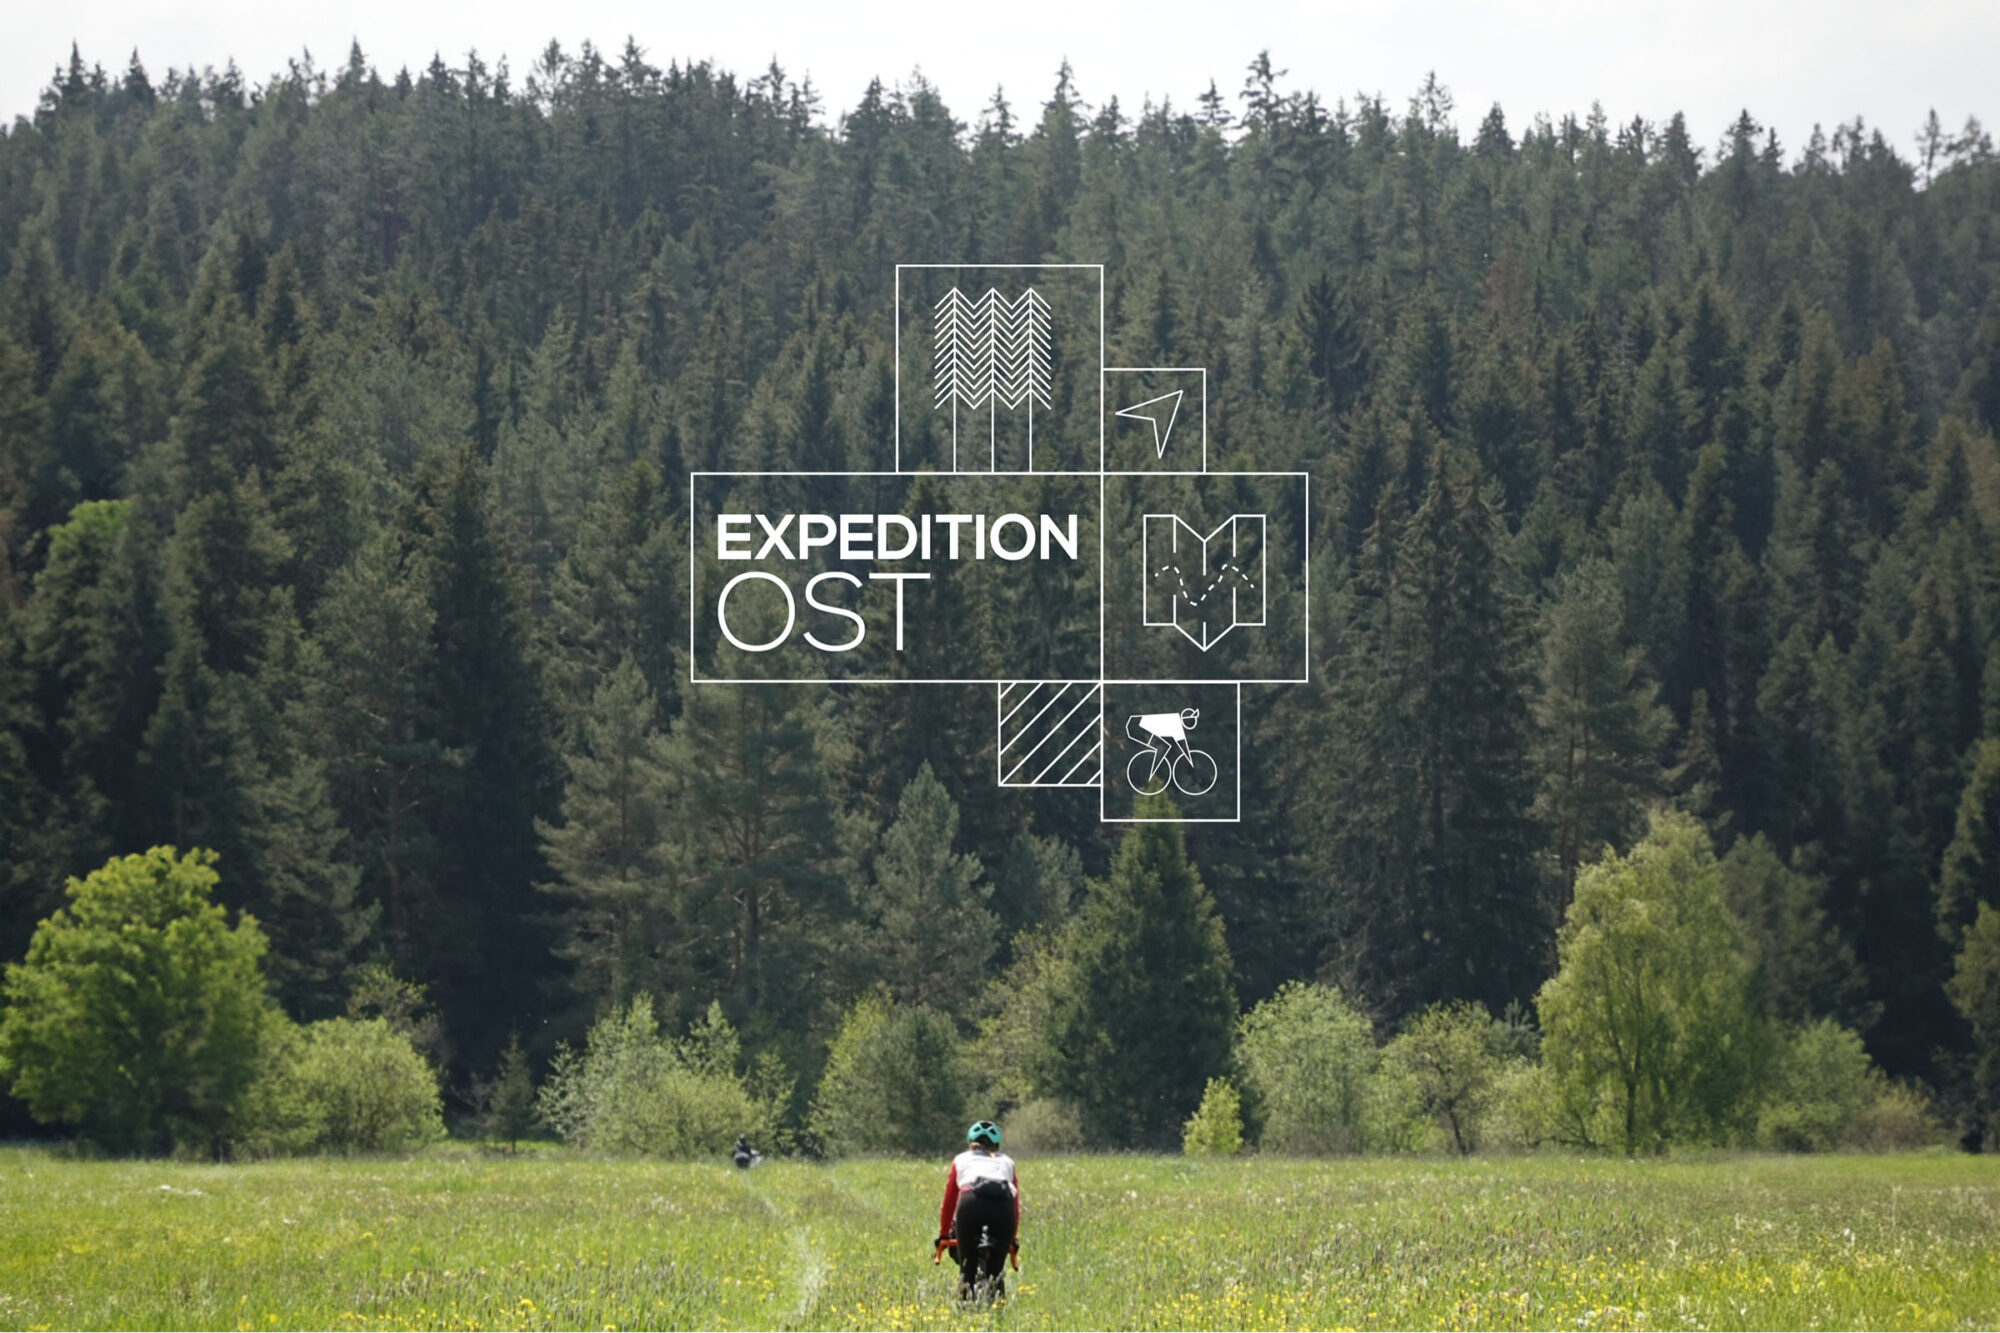 Expedition-Ost